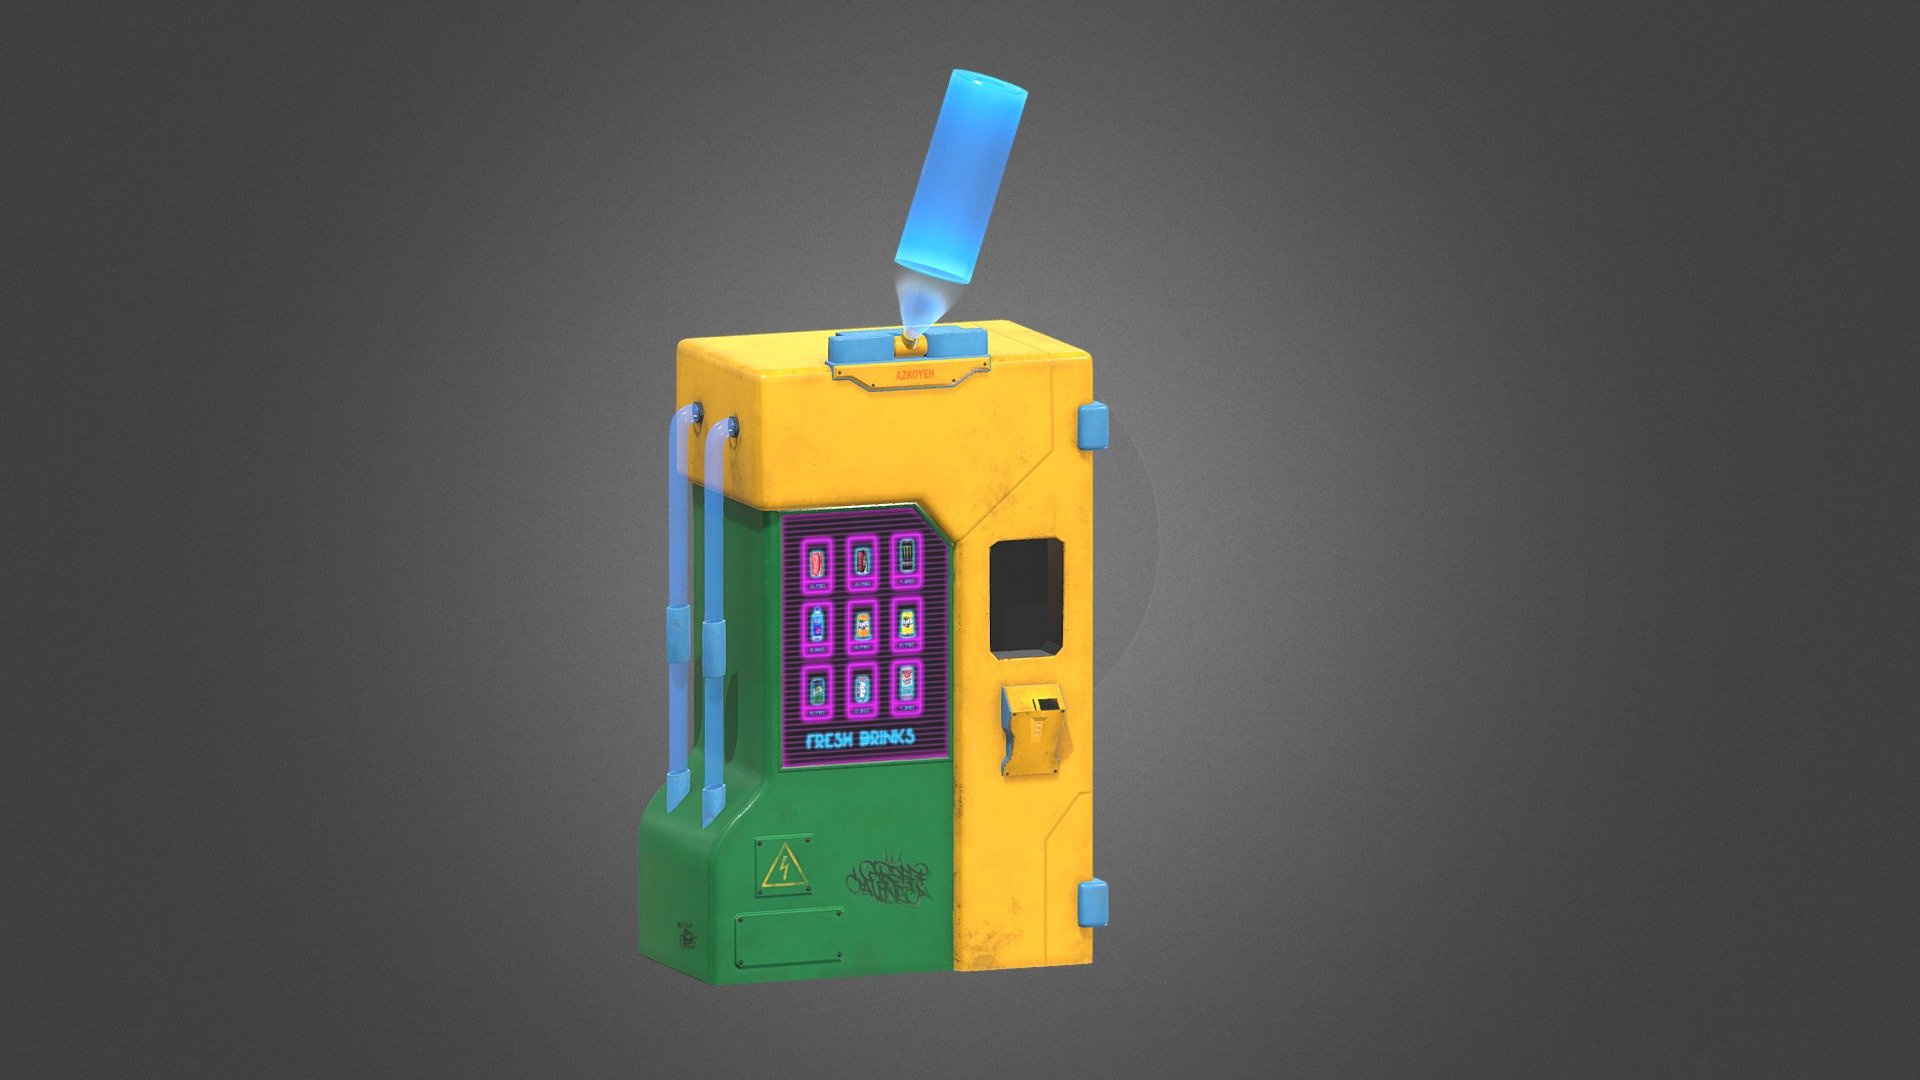 Fresh drinks machine cyberpunk style.

Made with: 3ds max and Substance painter 3d model